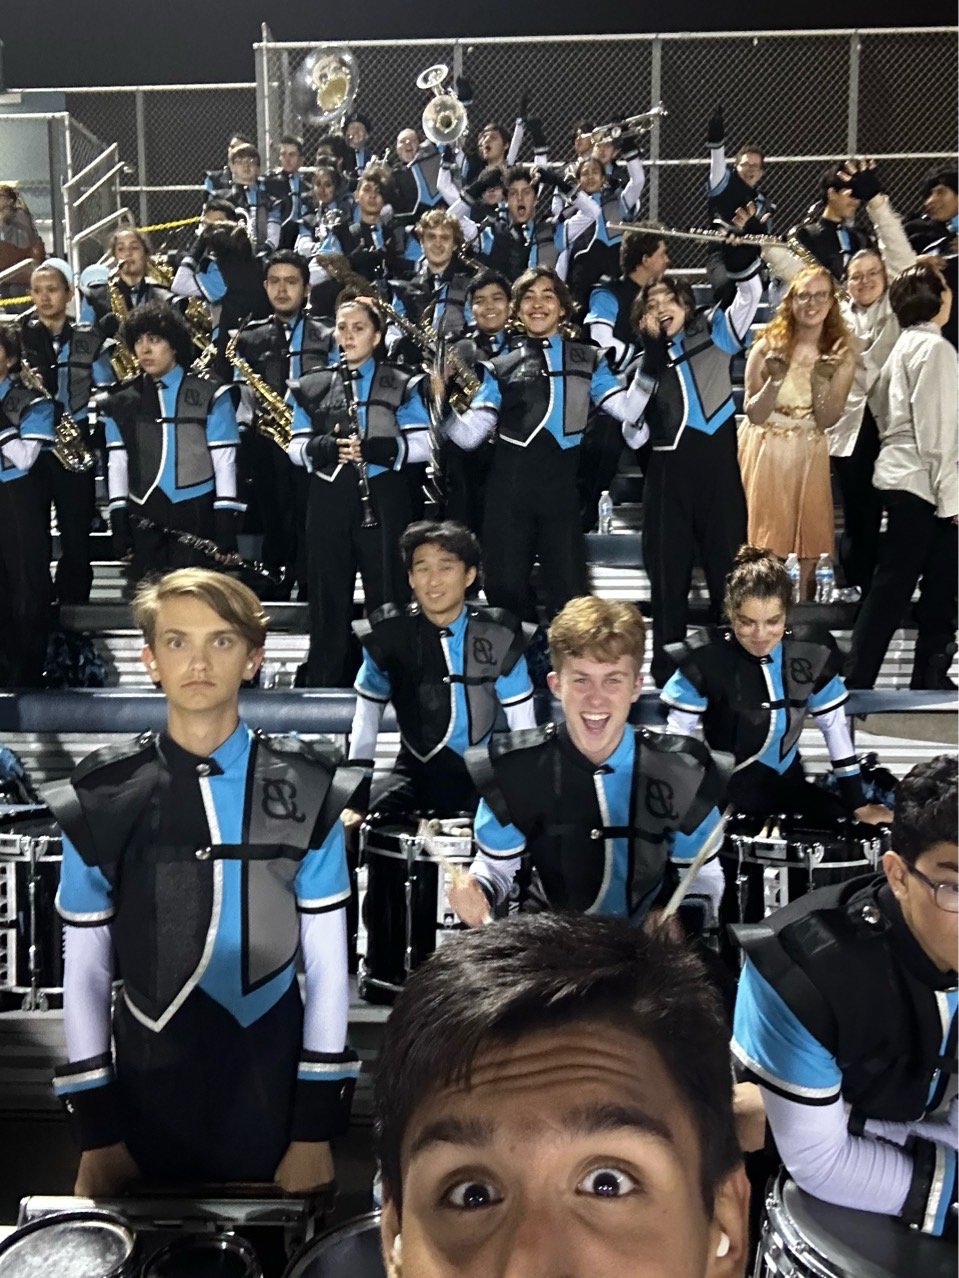 Buena Marching Band and Colorguard-All photos-45220359310.jpg